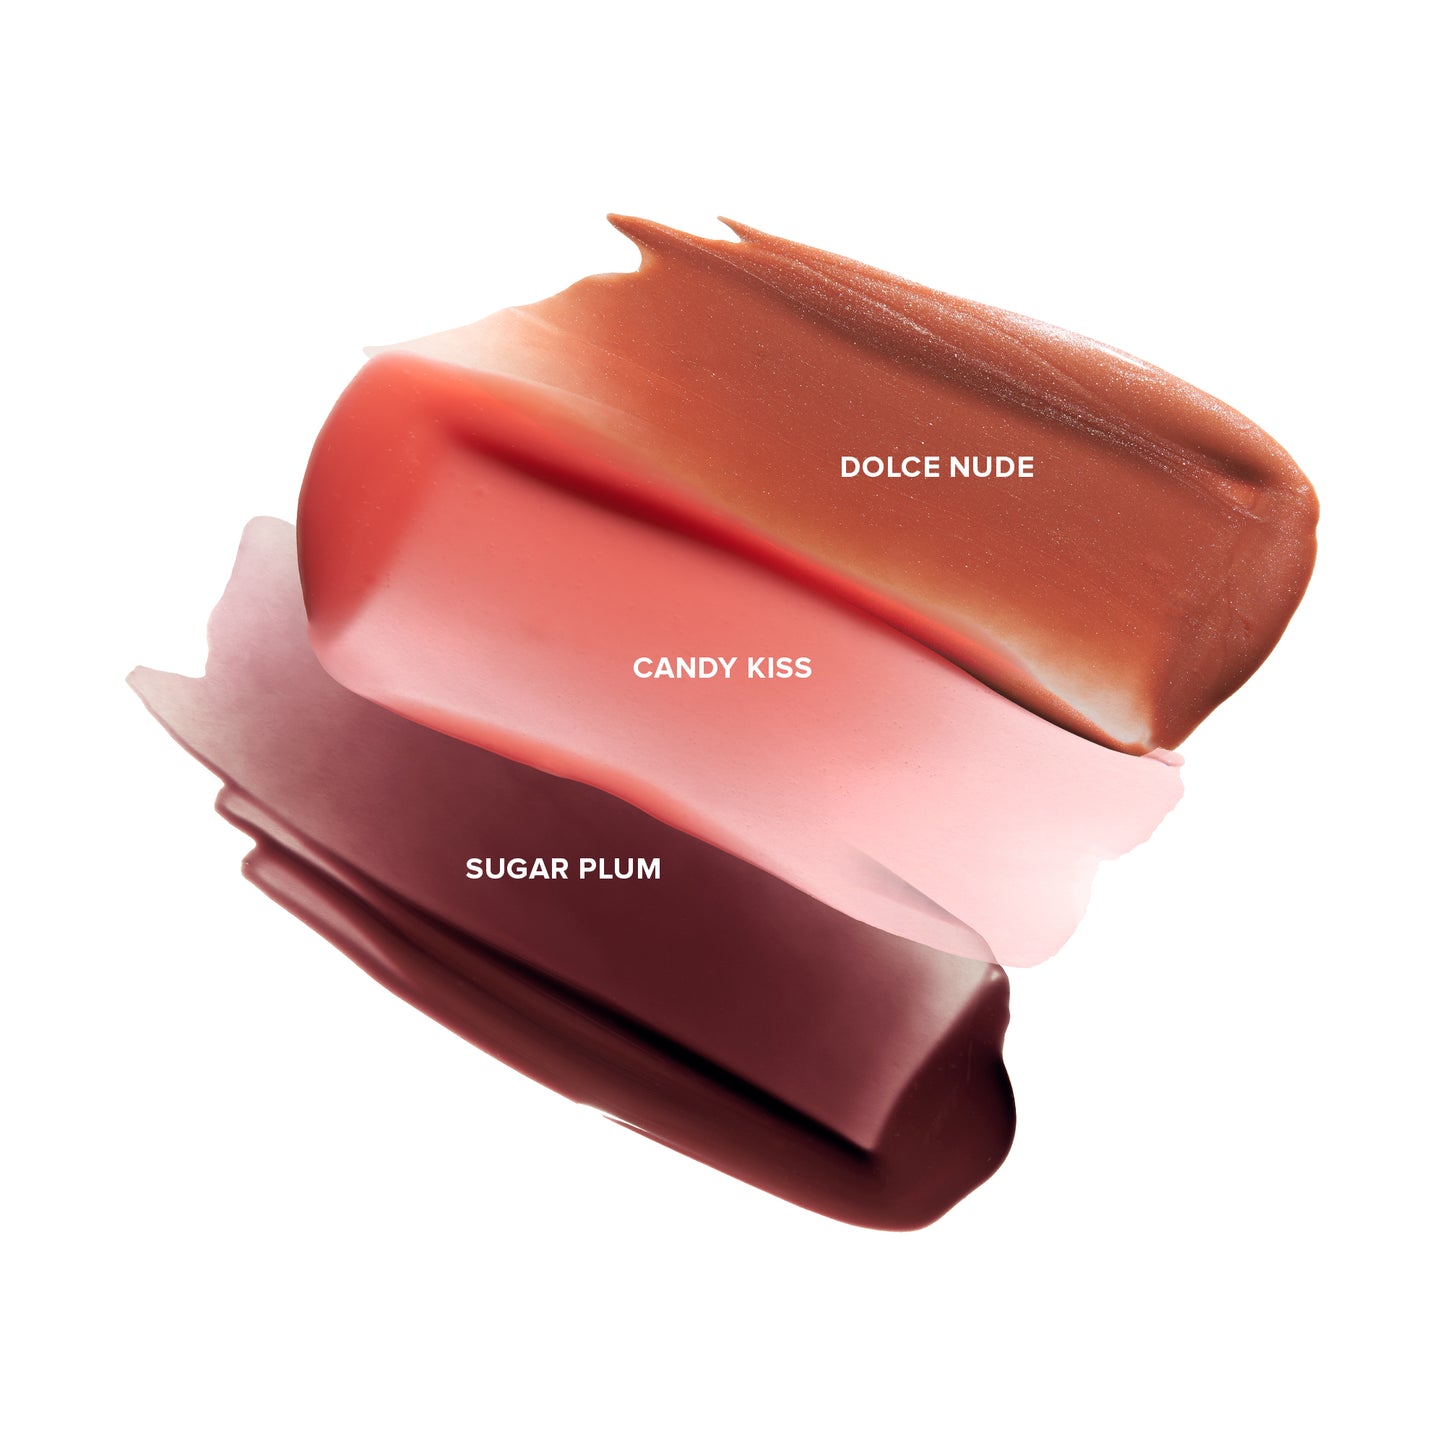 DOLCE NUDE CANDY KISS SUGAR PLUM